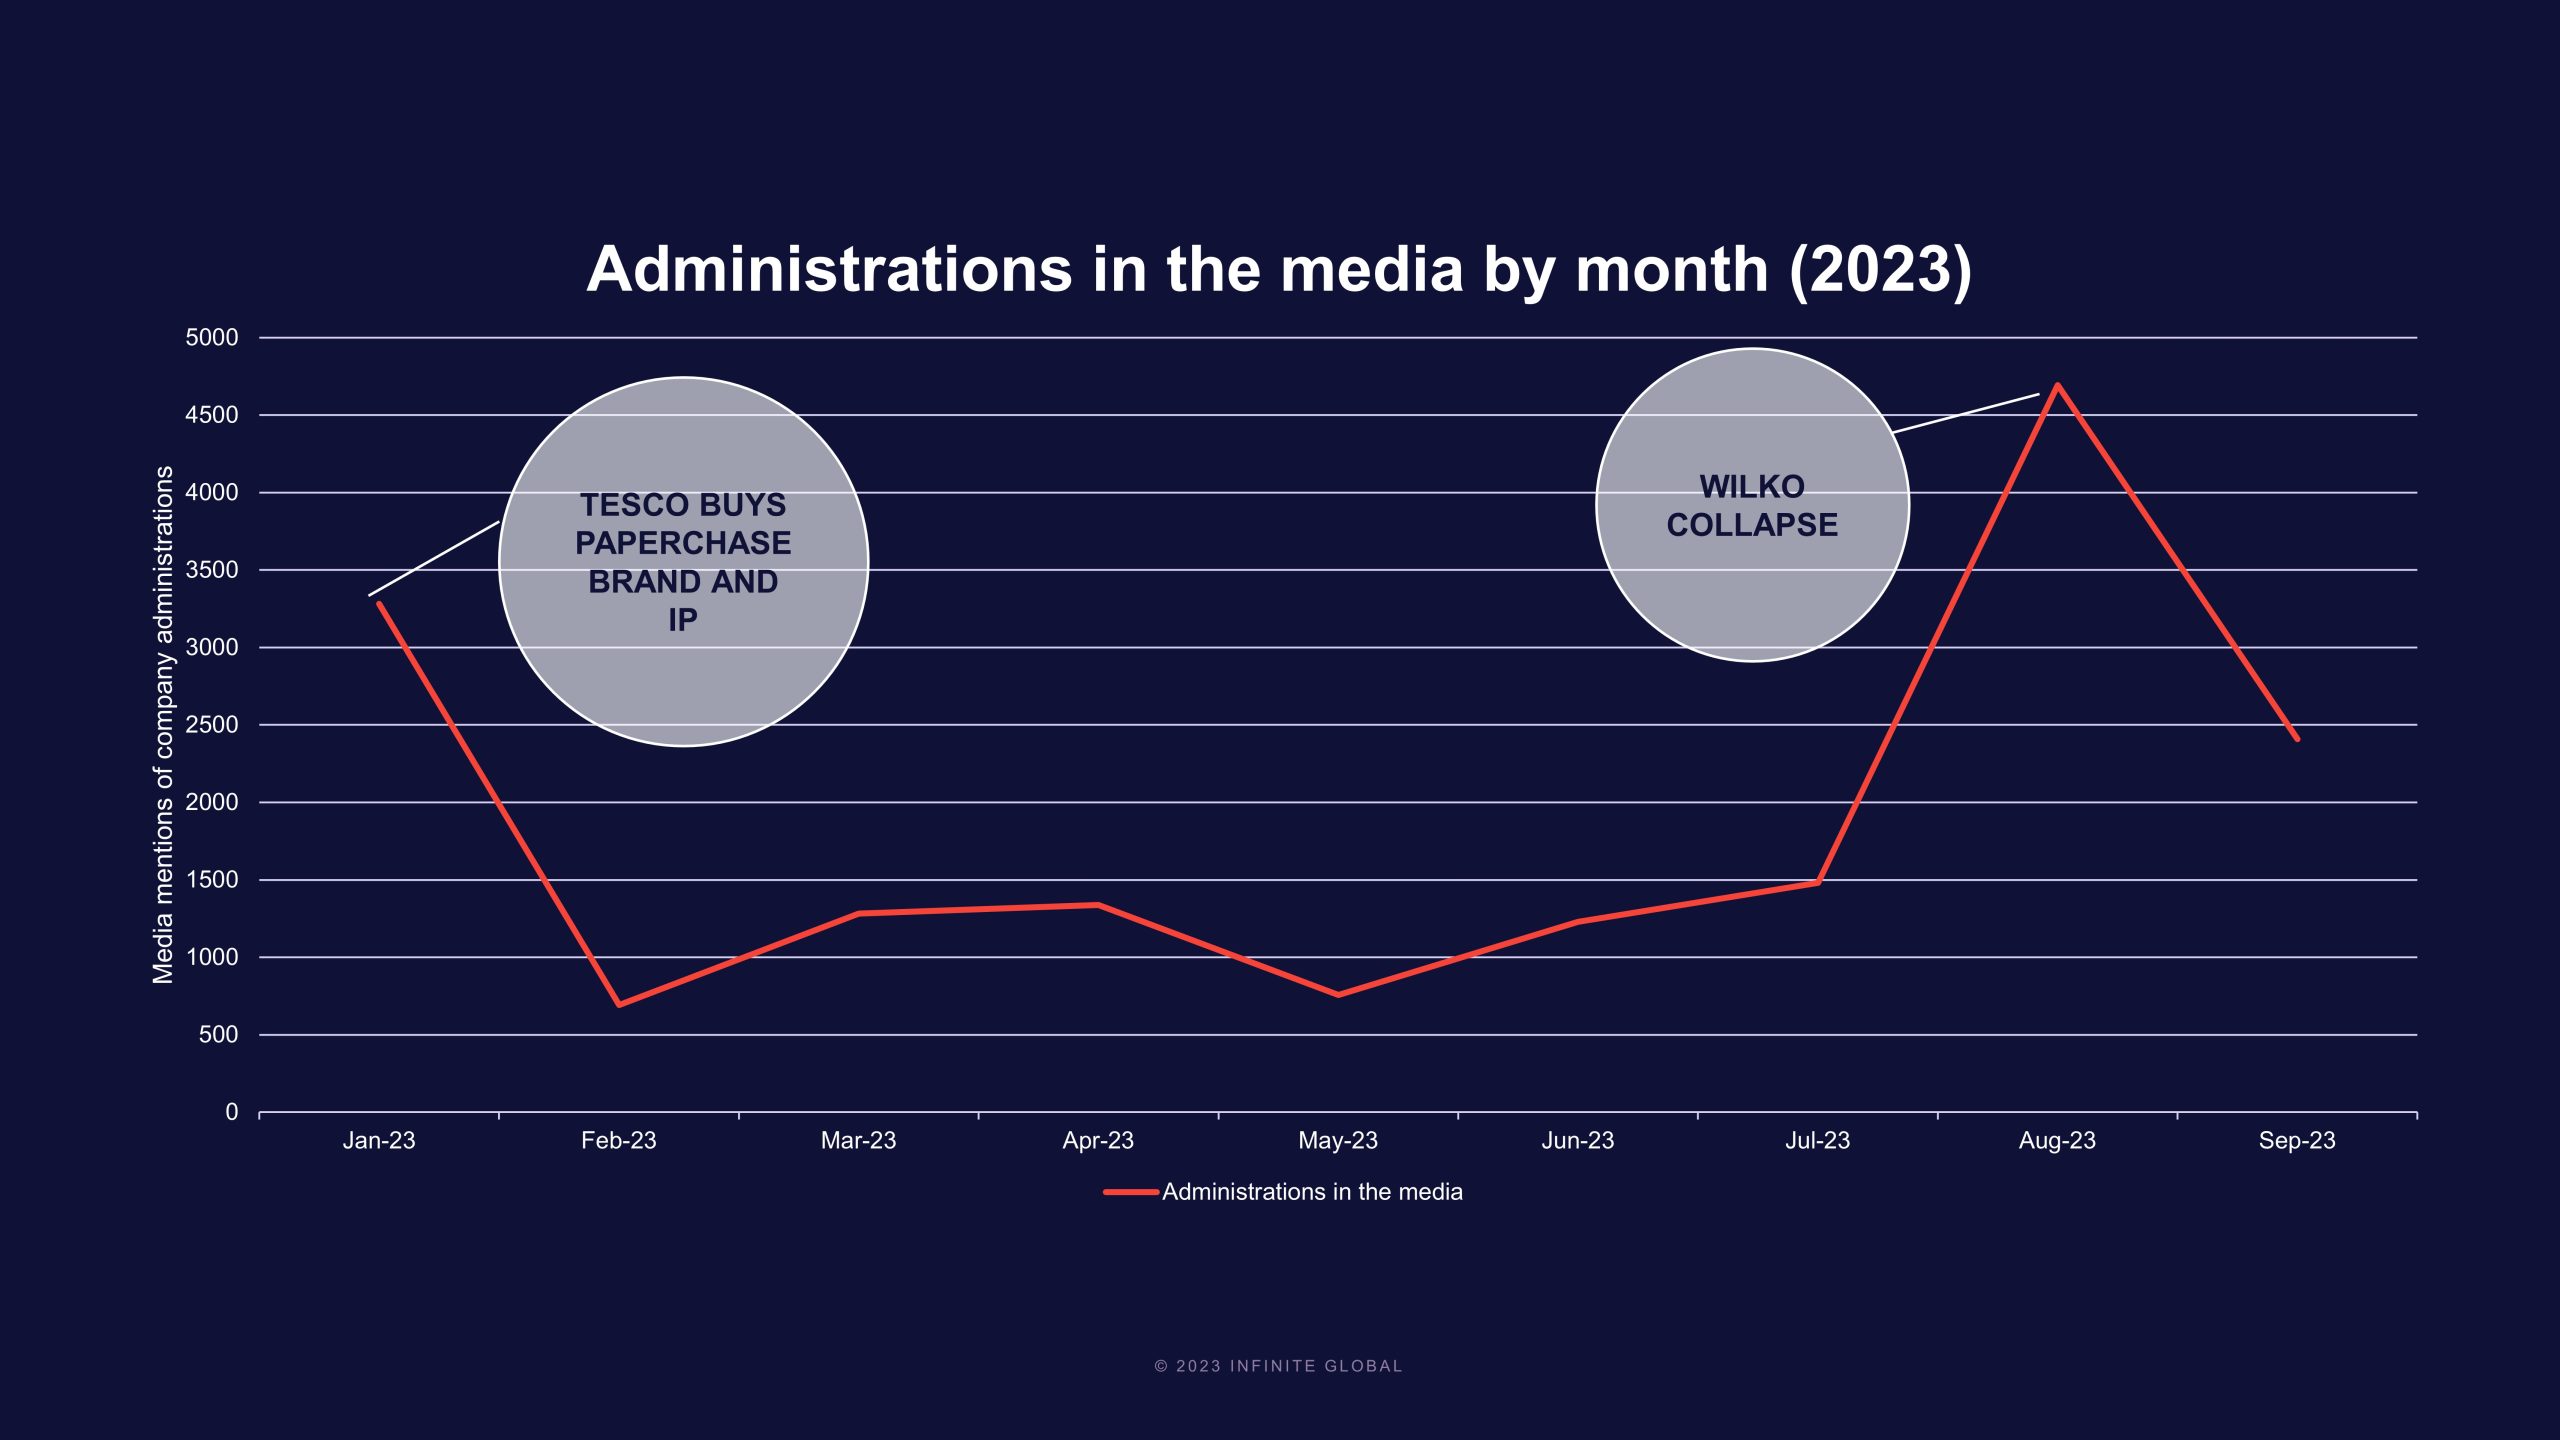 Administrations in the media by month (2023)